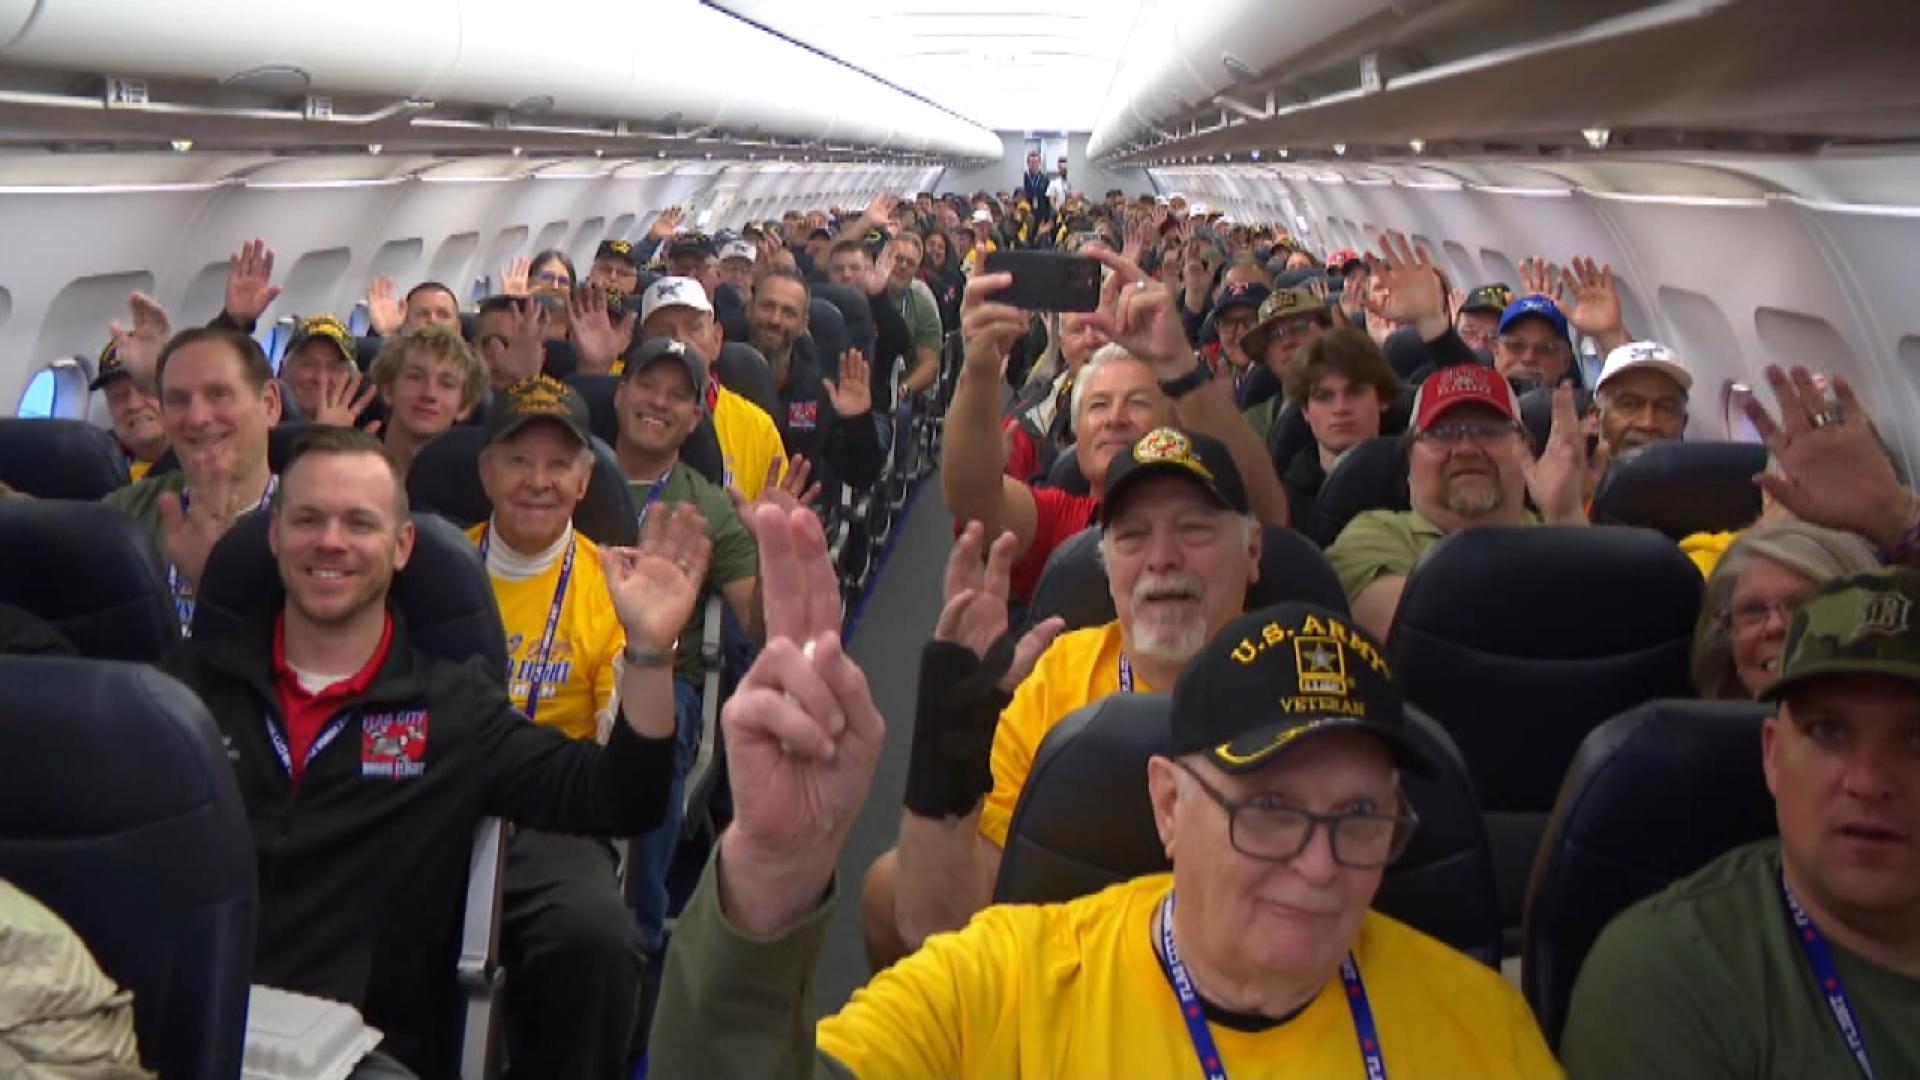 Flag City Honor Flight gives veterans the chance to head to Washington D.C. On Tuesday, over 90 veterans made the trip.